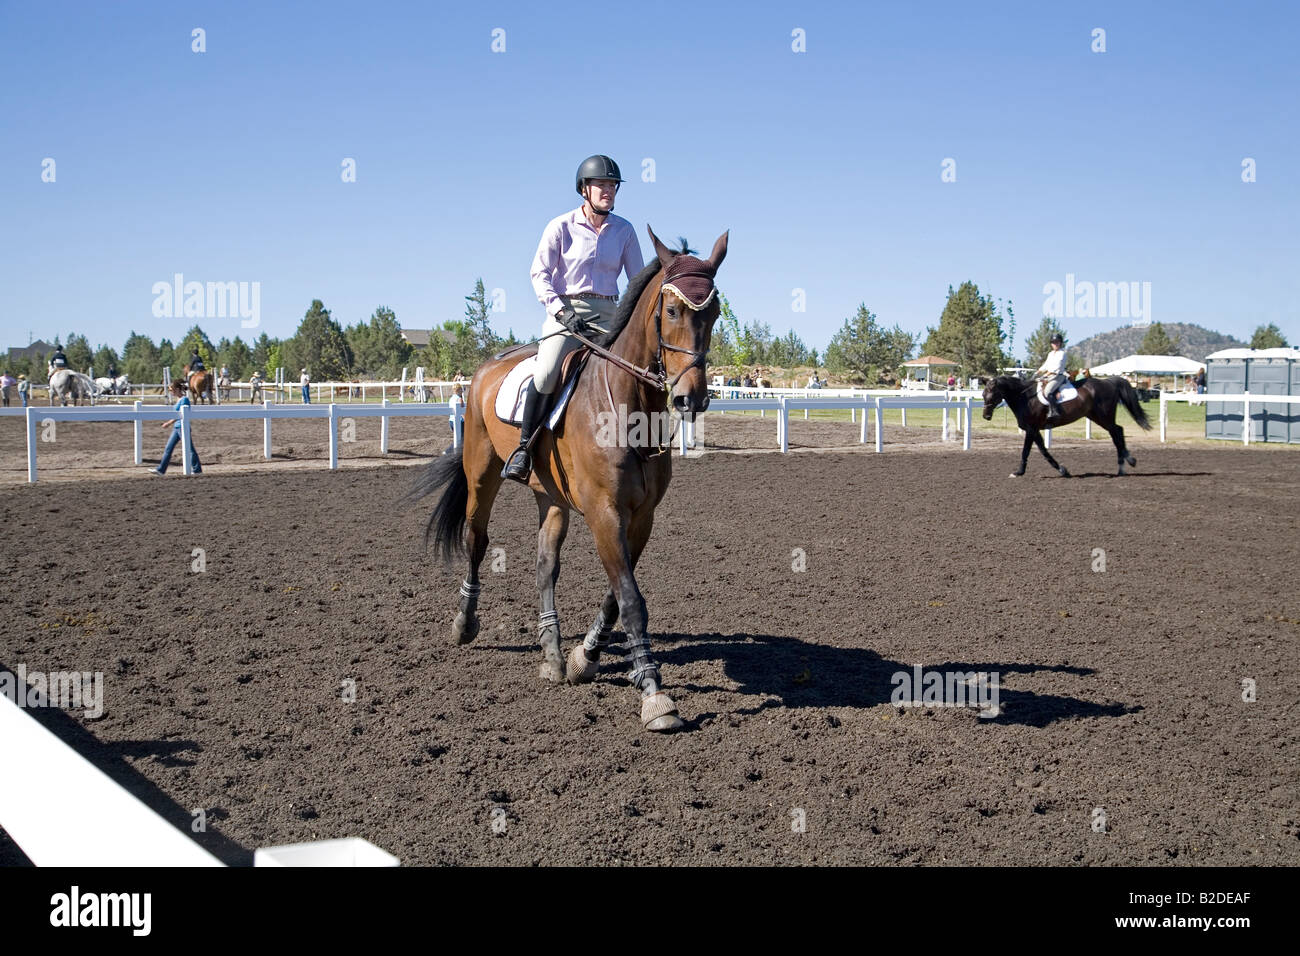 A rider in the practice ring at the High Desert Classic equestrian horse and riding show during July Stock Photo